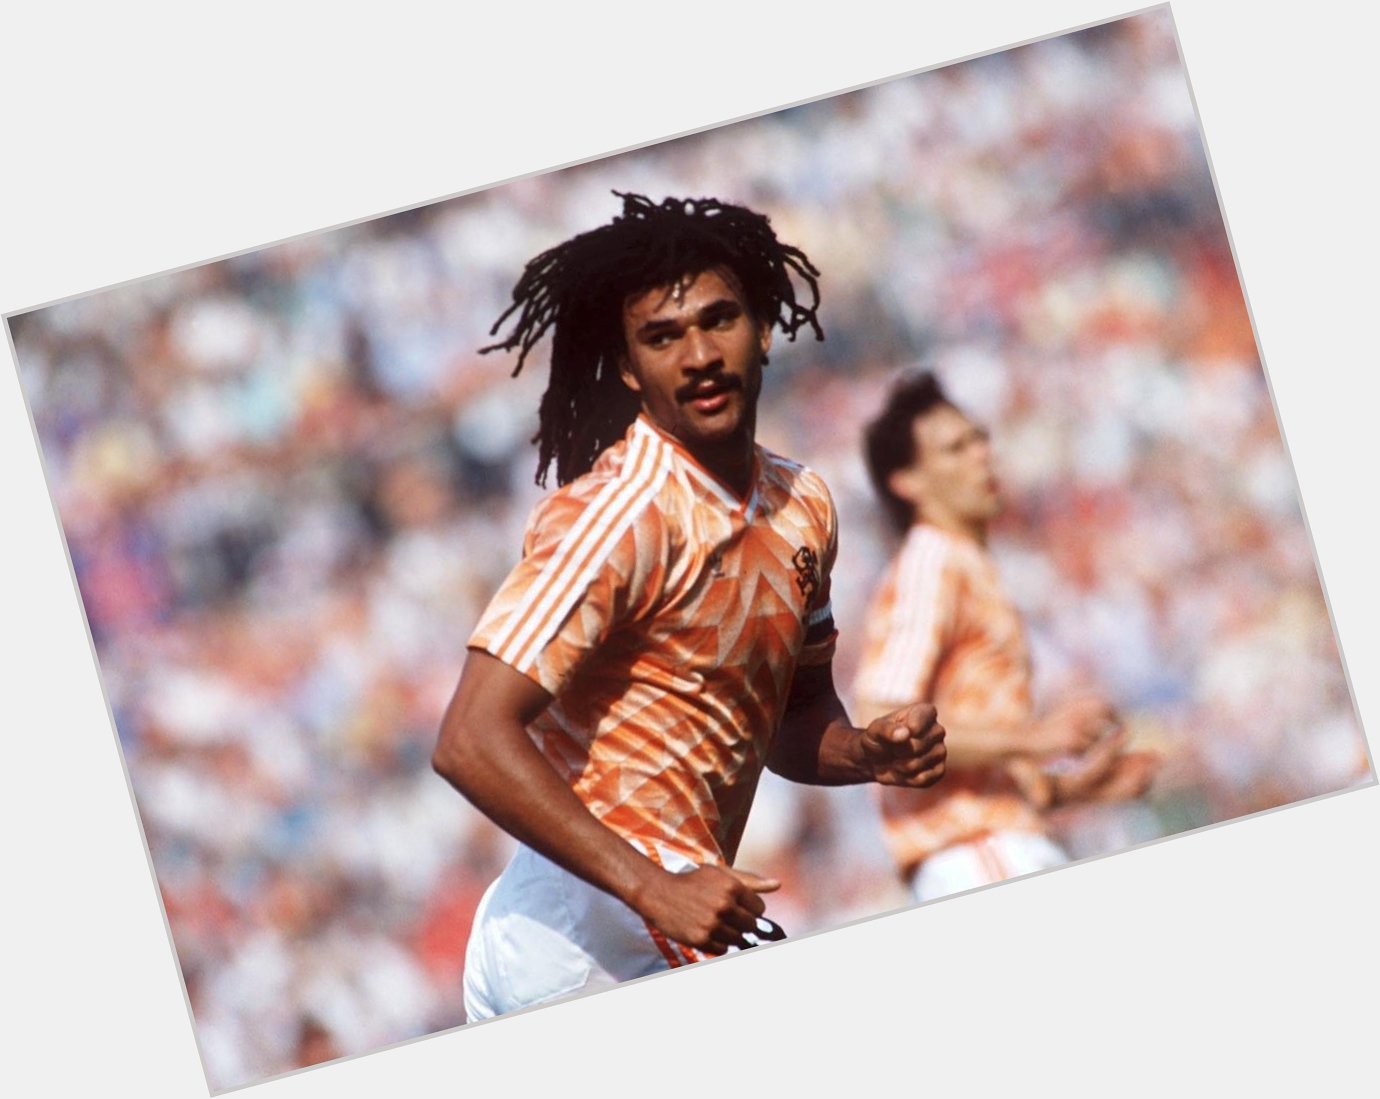 Happy Birthday Ruud Gullit! The European Championship and European Cup winner is 57 today 